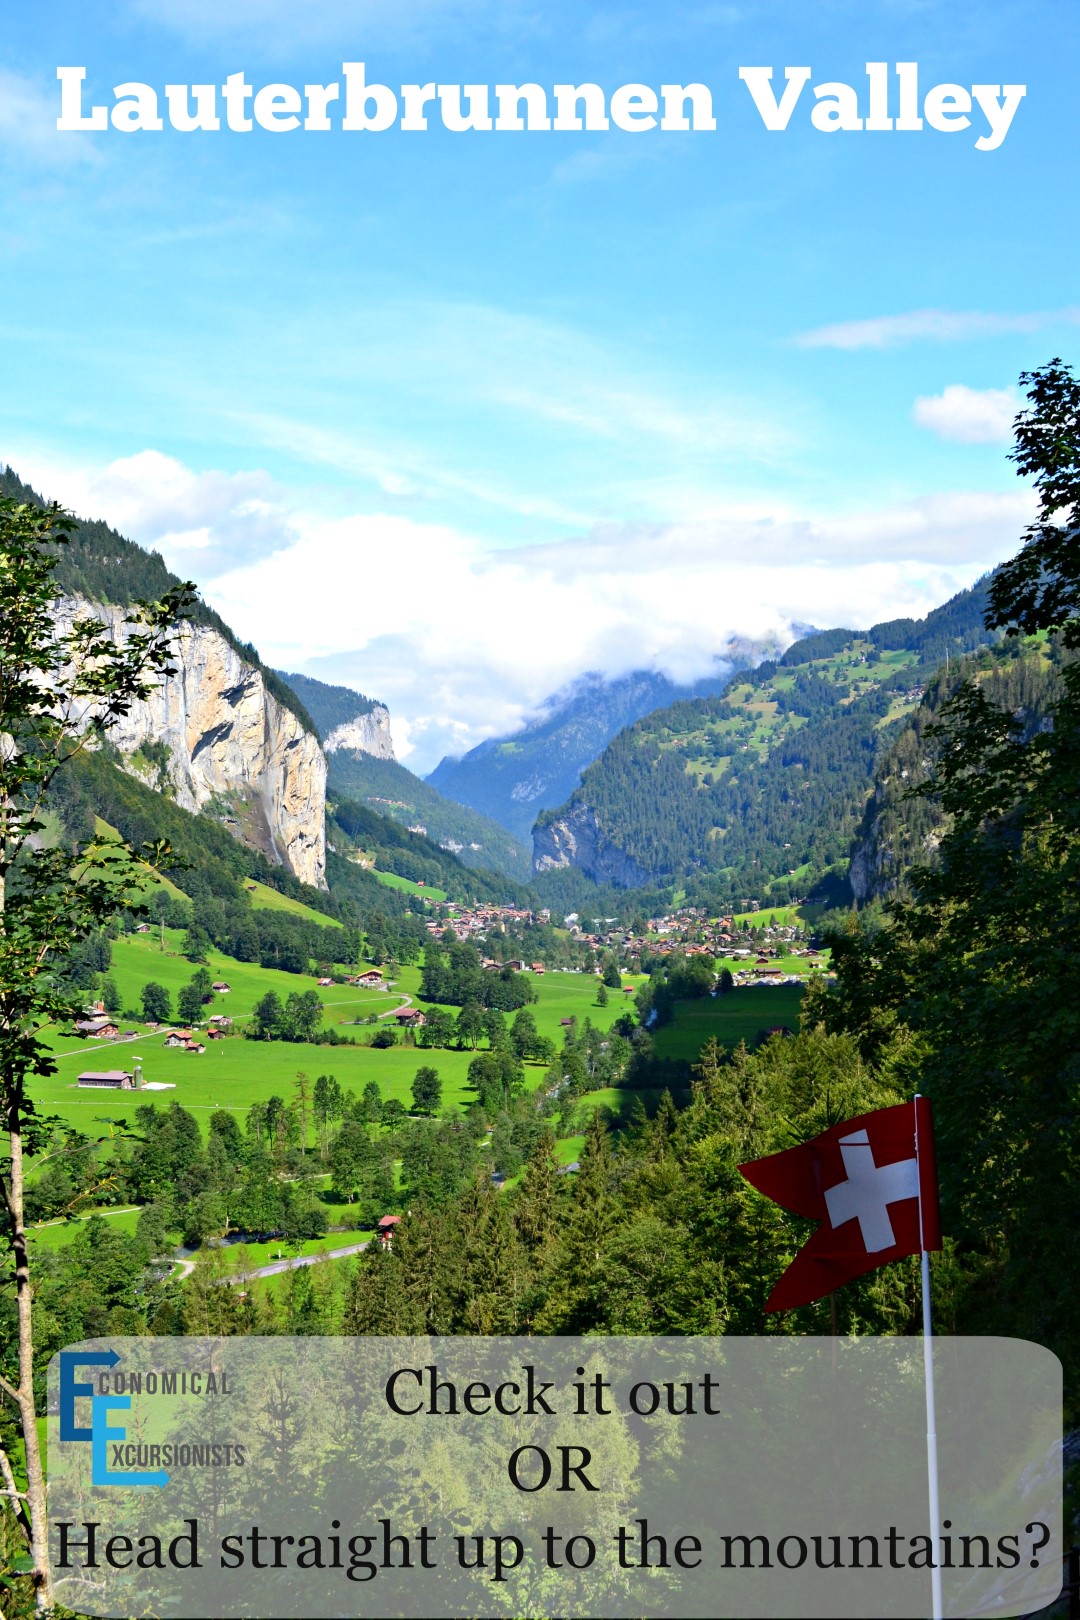 Lauterbrunnen Valley: Skip it or check it out?